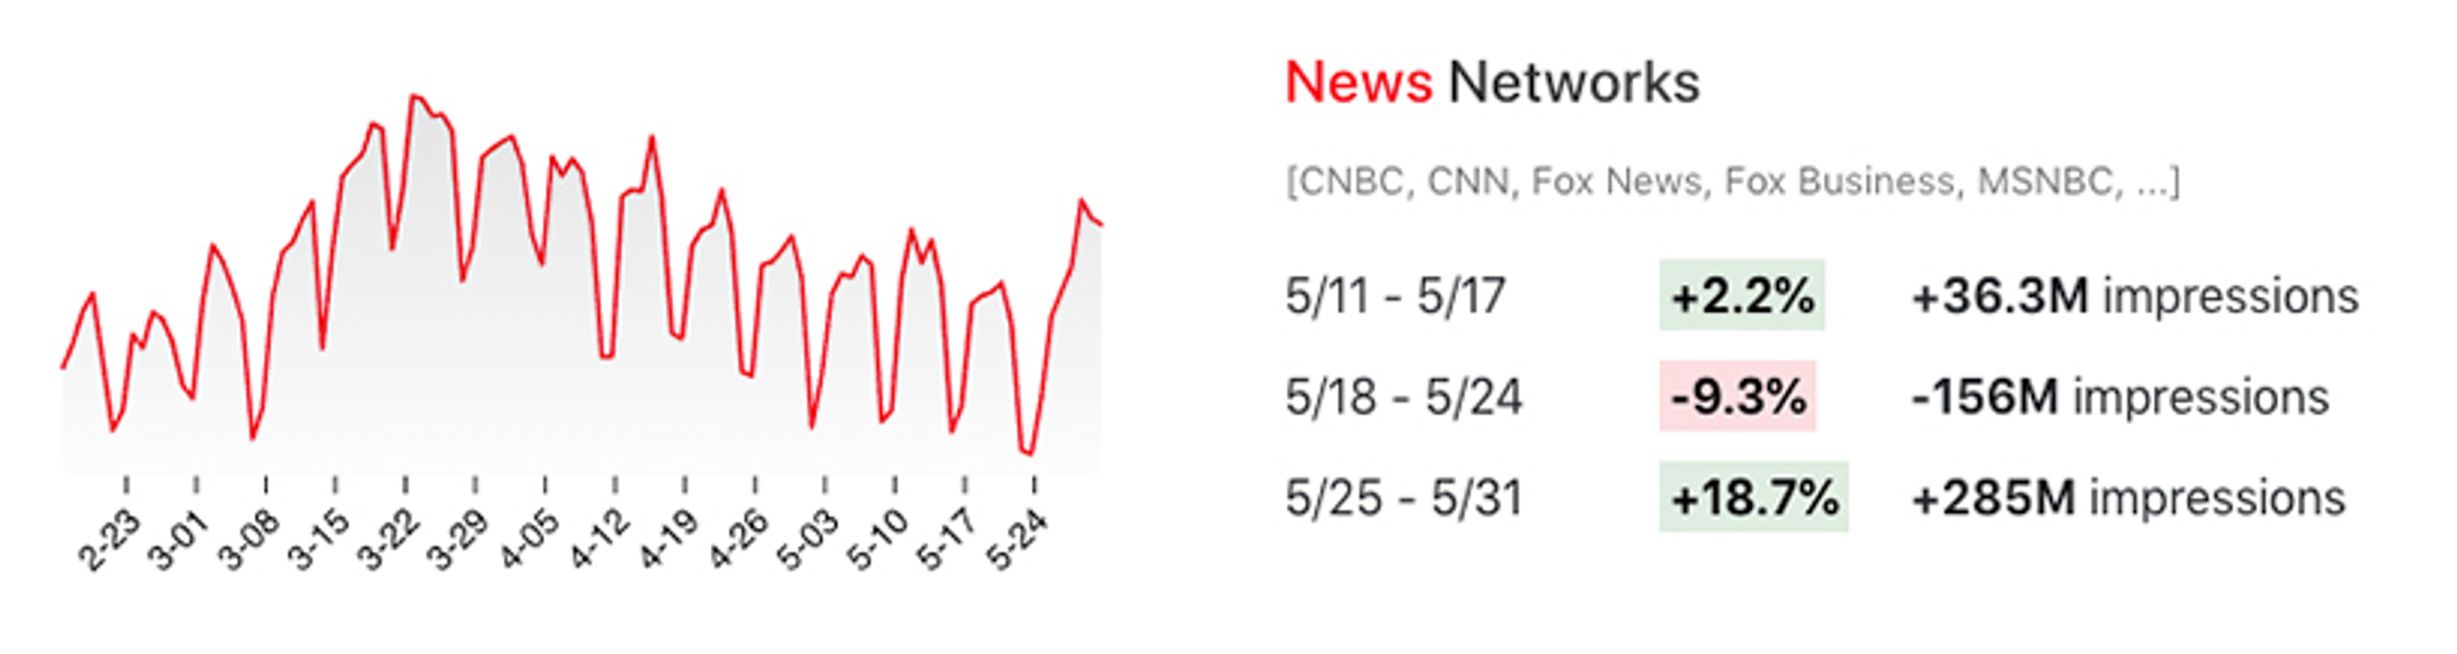 Viewership changes for news networks in May 2020.